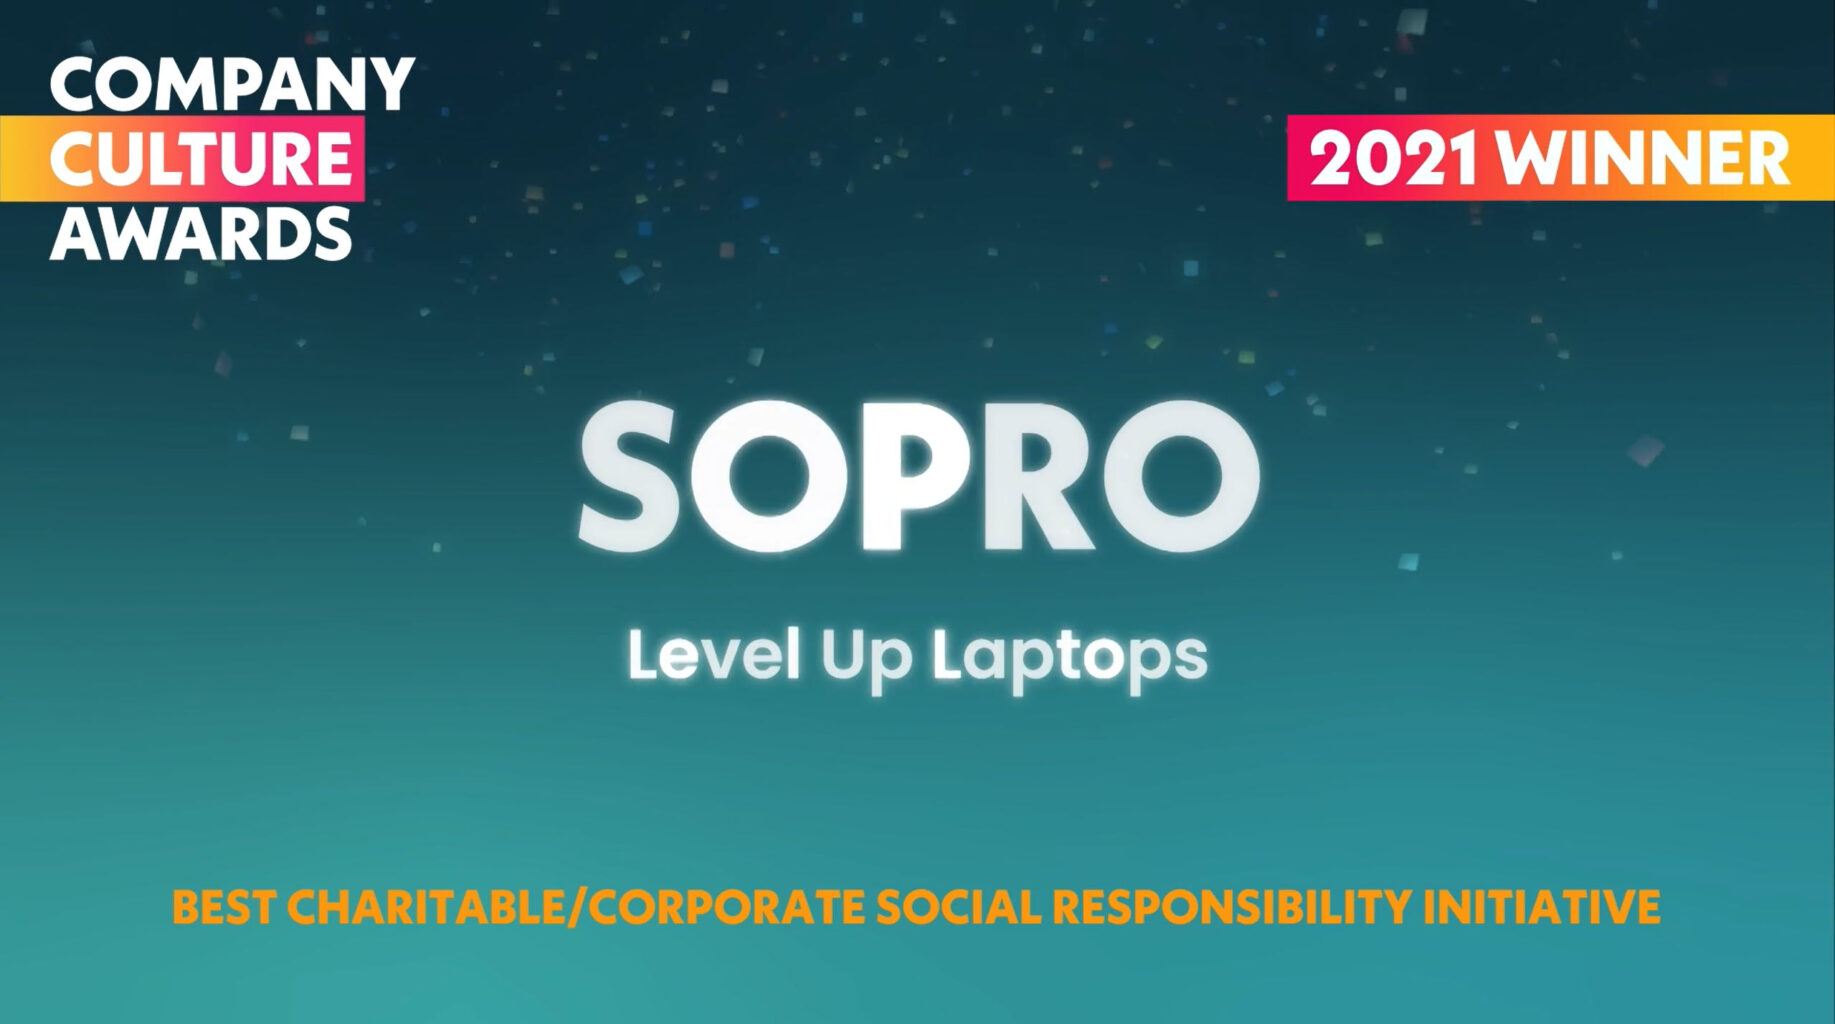 Sopro wins at the company culture awards